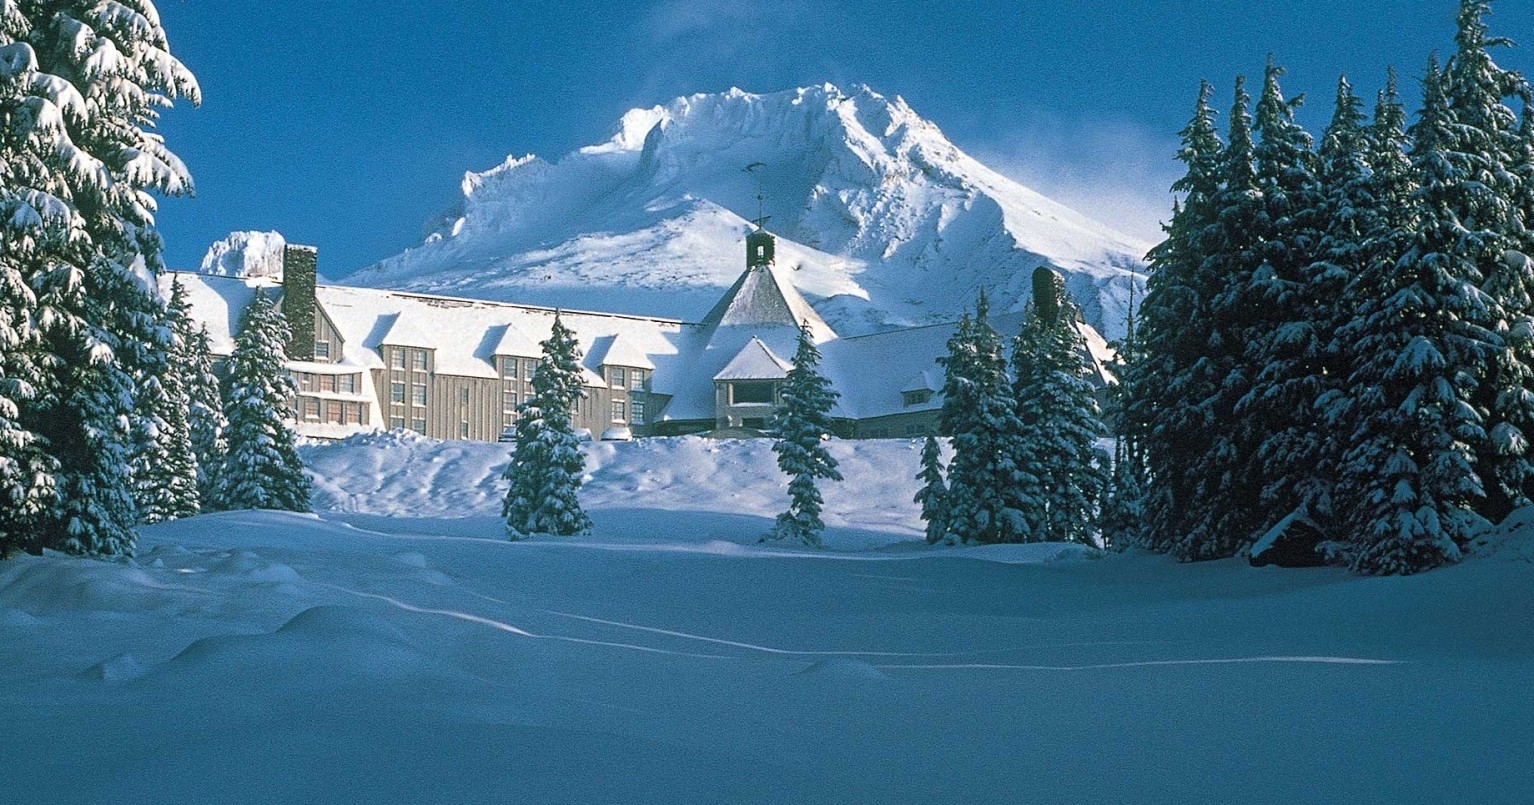 View of Timberline and Mt. Hood in the winter